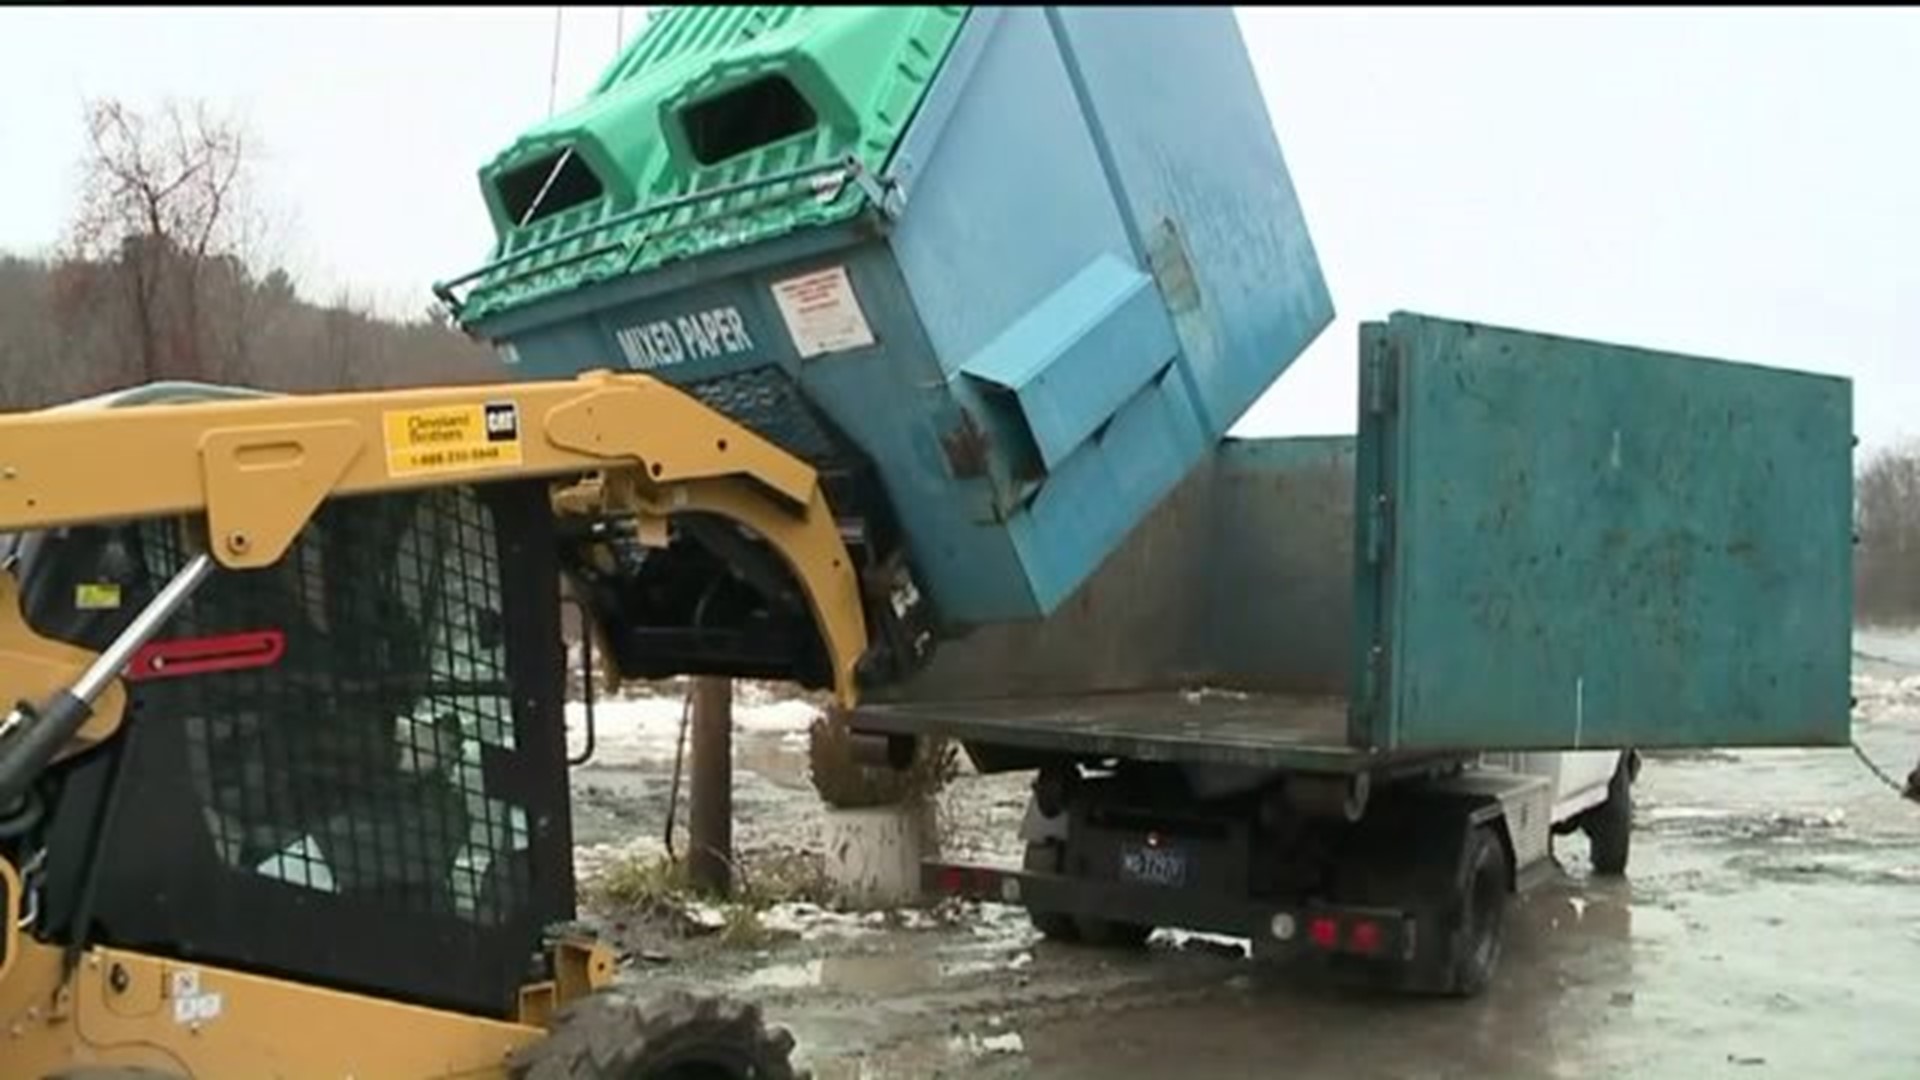 One Recycling Site Closes, Another Opens